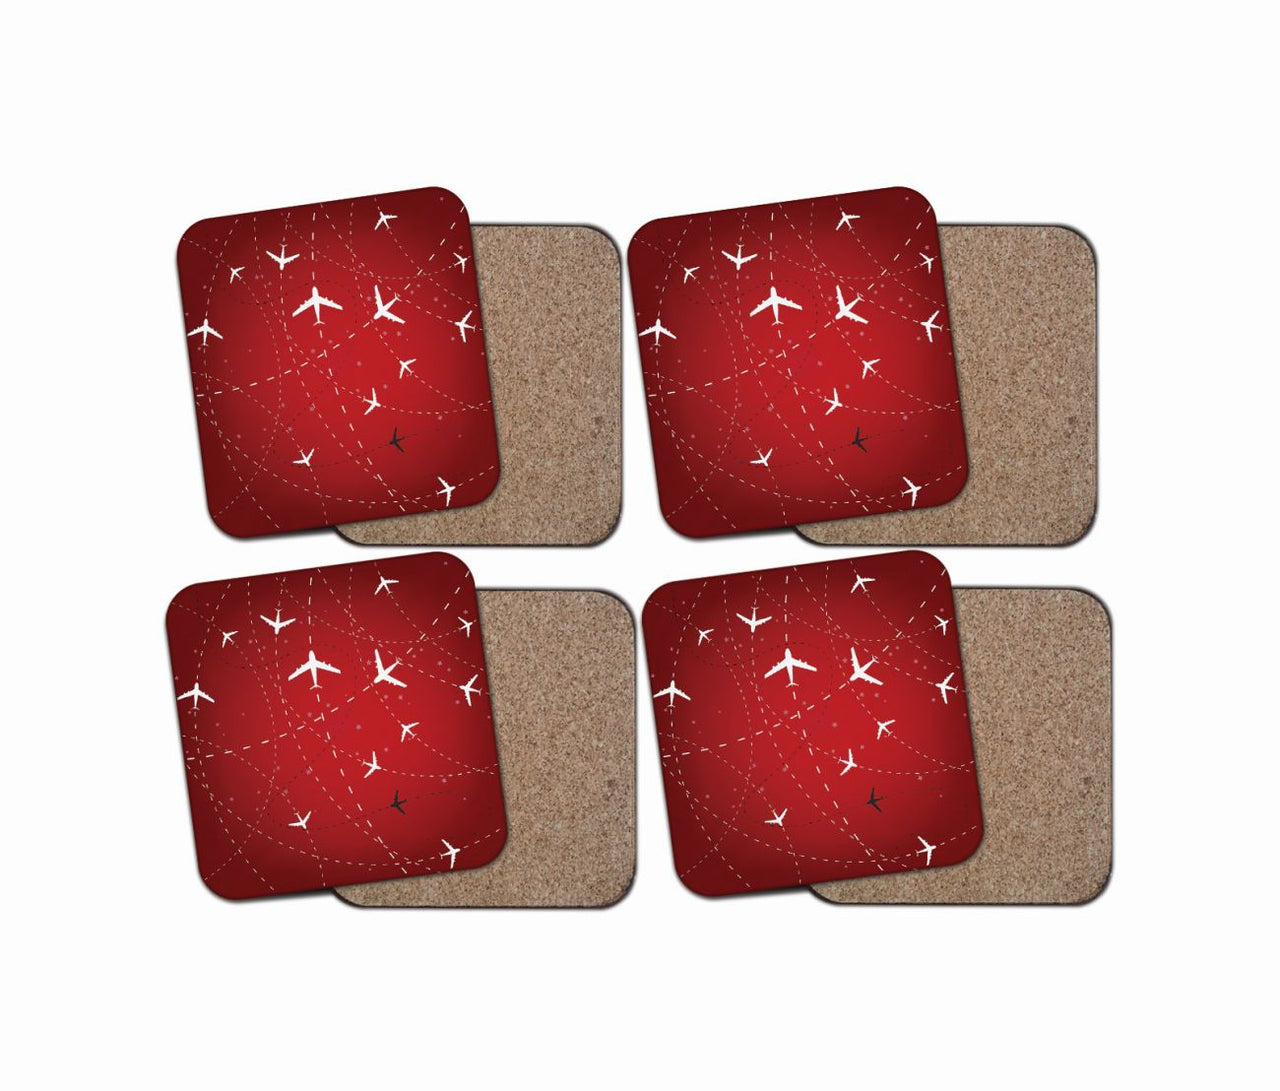 Travelling with Aircraft (Red) Designed Coasters